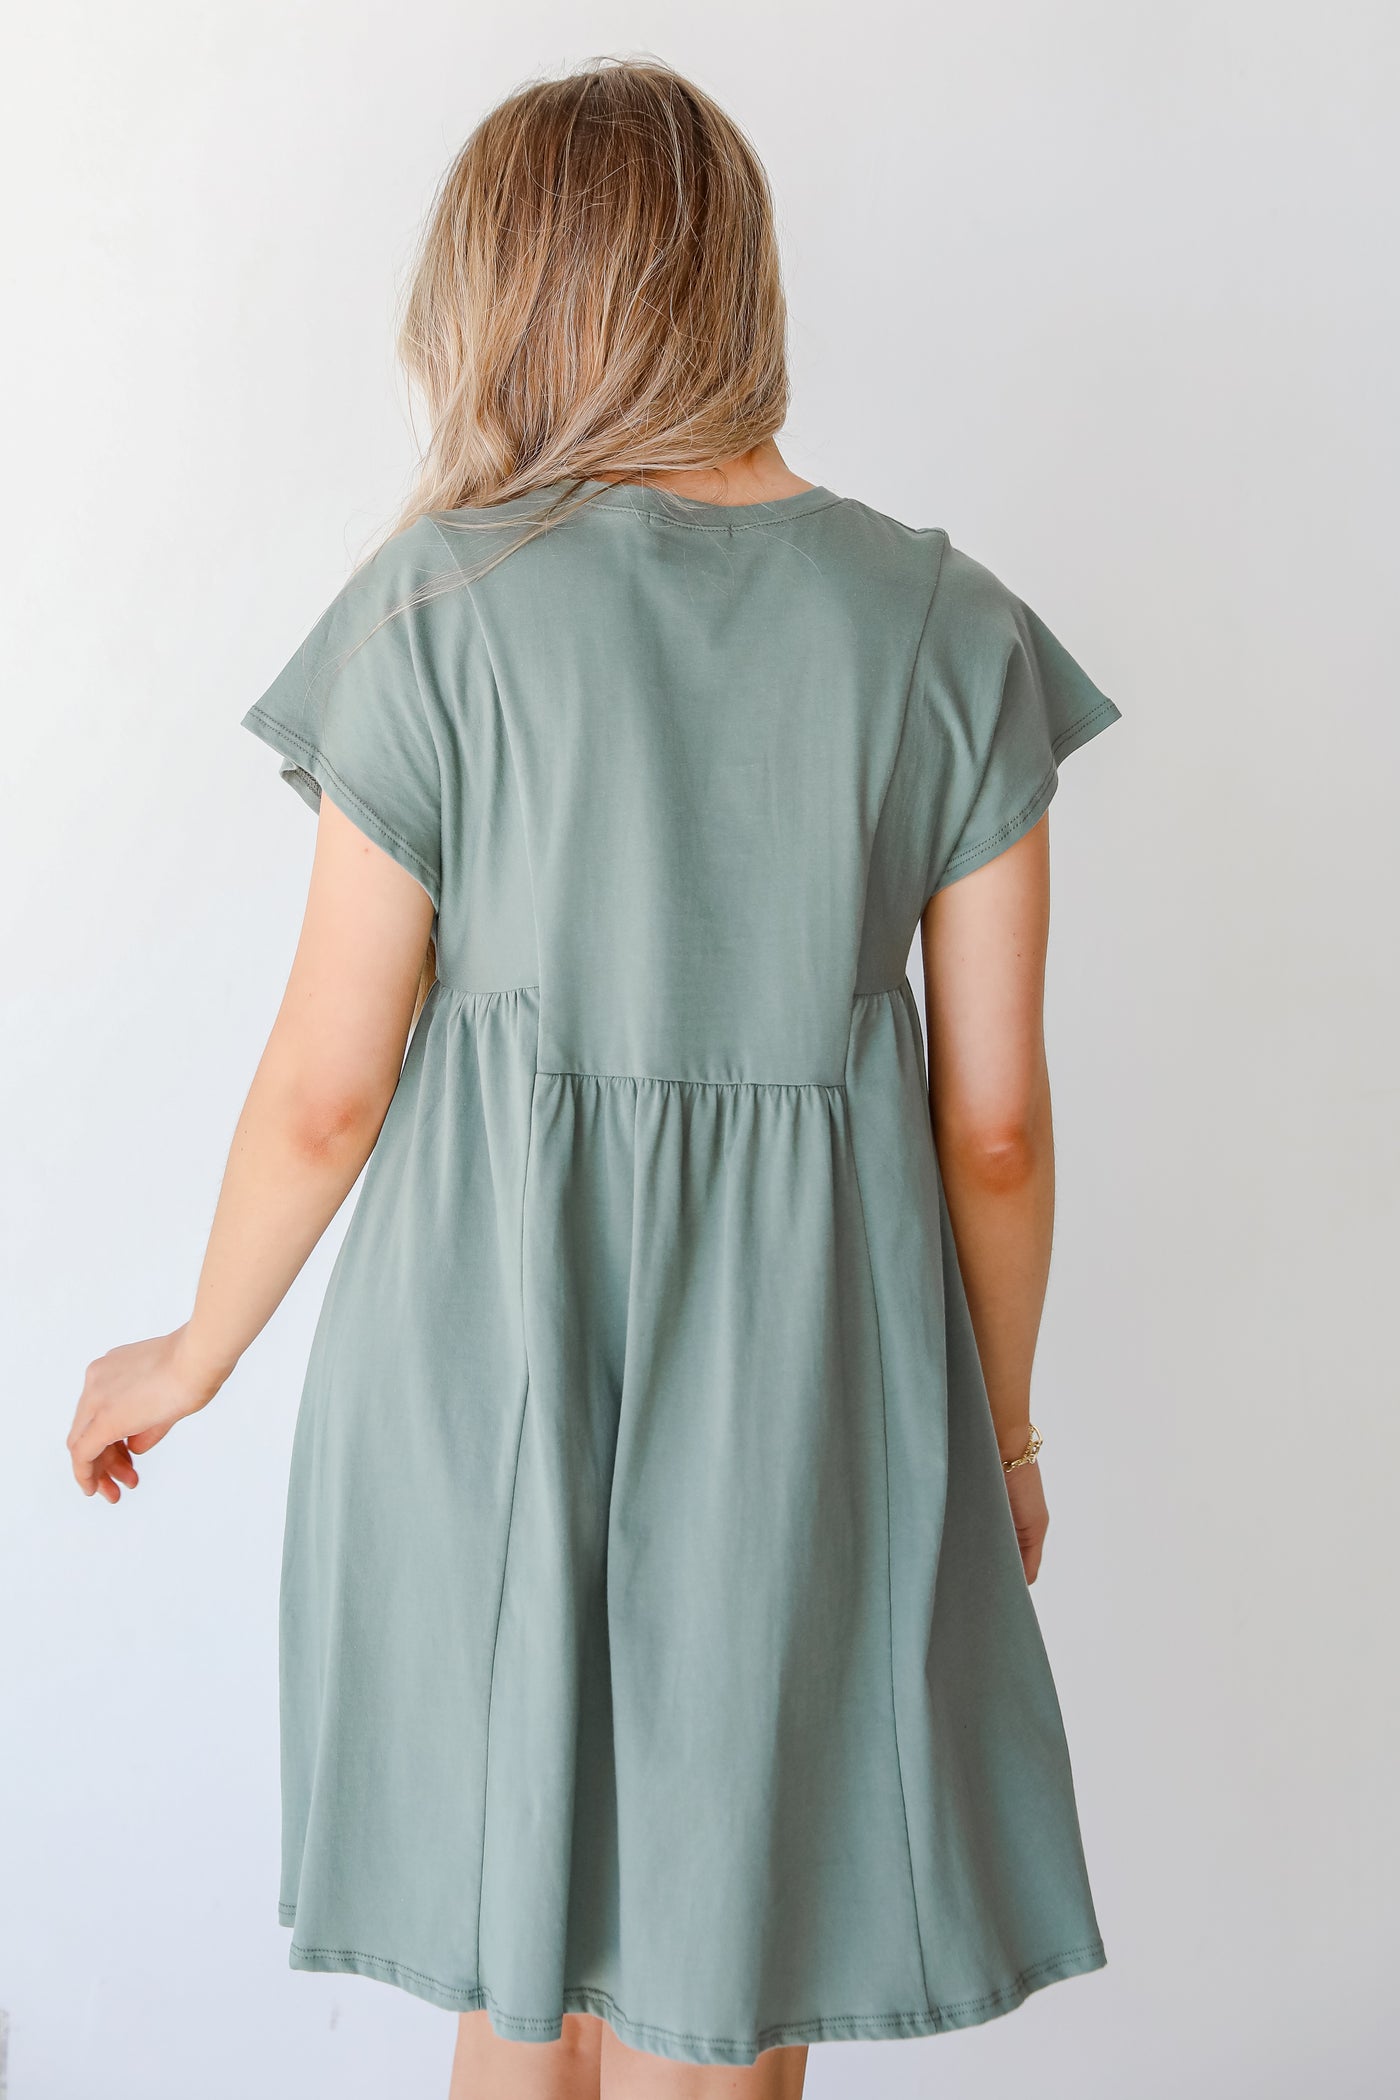 Babydoll Dress in sage back view